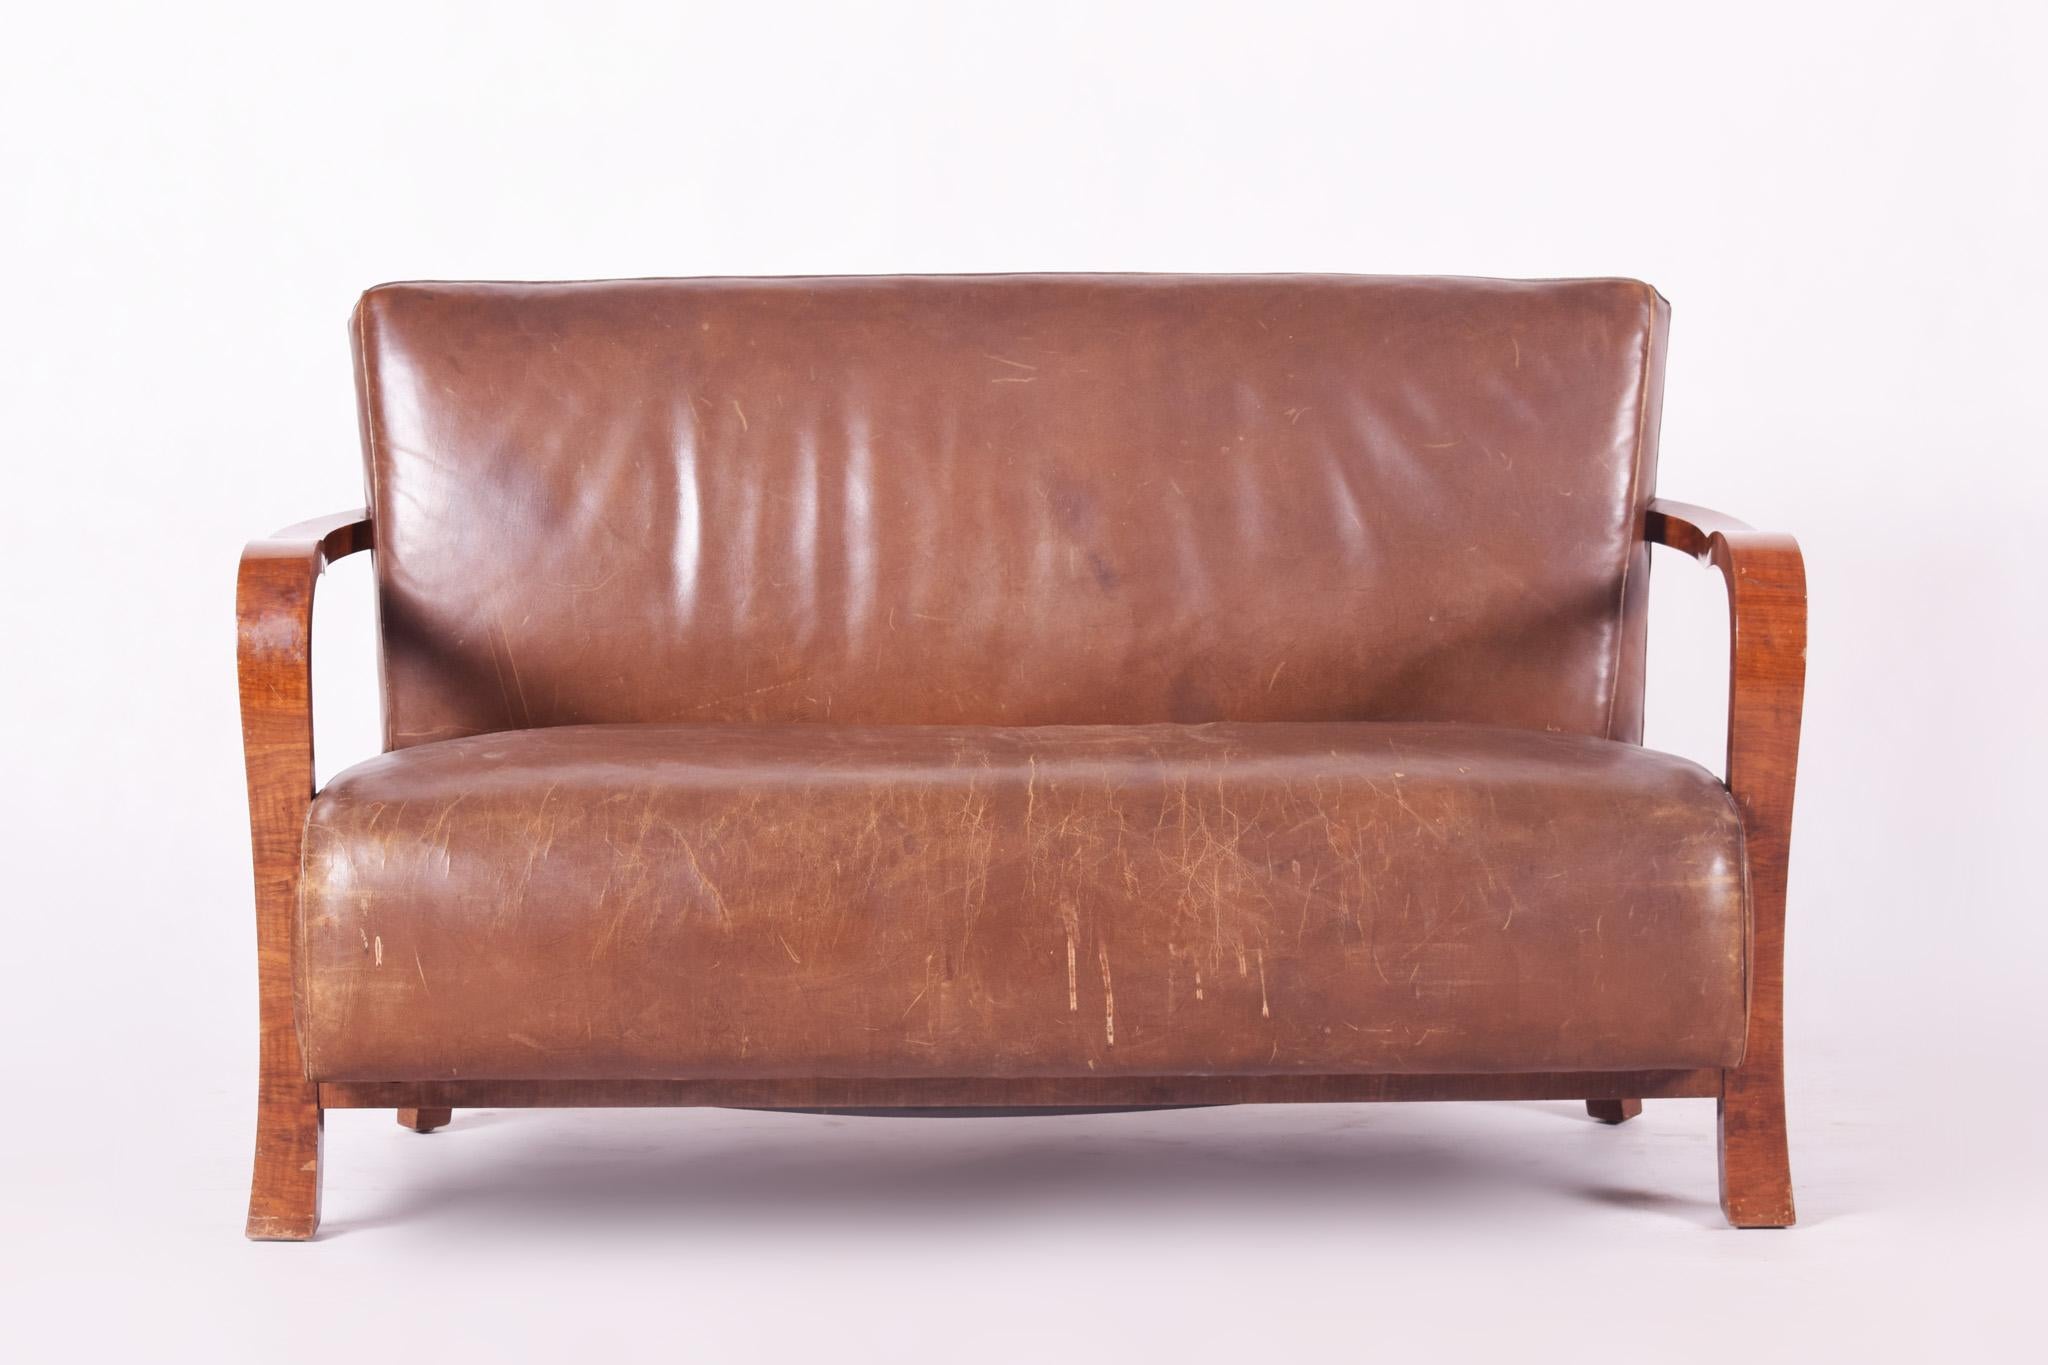 Czech Art Deco three-piece suit.
Material: Walnut, leather
Original well preserved condition

Armchair dimensions:
Height 85 cm (33.46 in)
Width 67 cm (26.38 in)
Depth 73 cm (28.74 in)
Seat height 42 cm (16.54 in)

Sofa dimensions:
Height